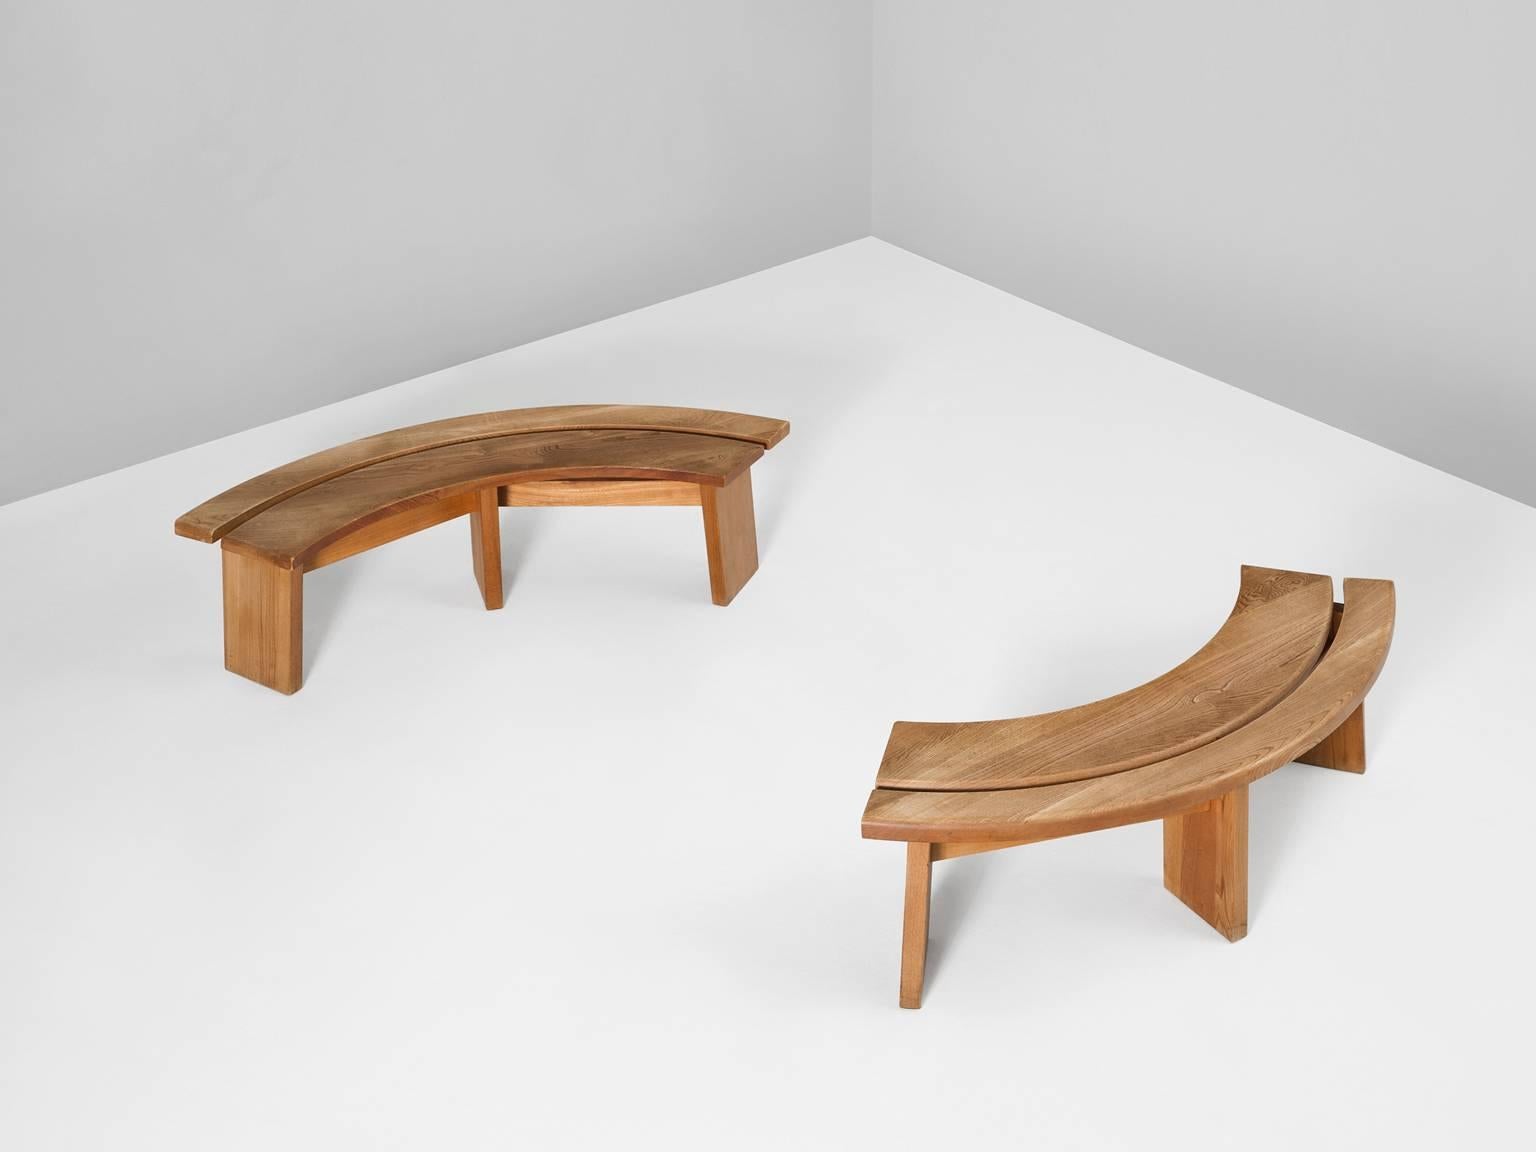 Set of two benches, in elm, by Pierre Chapo, France, 1960s. 

Set of two elegantly curved benches. Made of solid elmwood. A soft all-over patina is visible on the wood. This emphasizes the natural expression of these items. These benches are